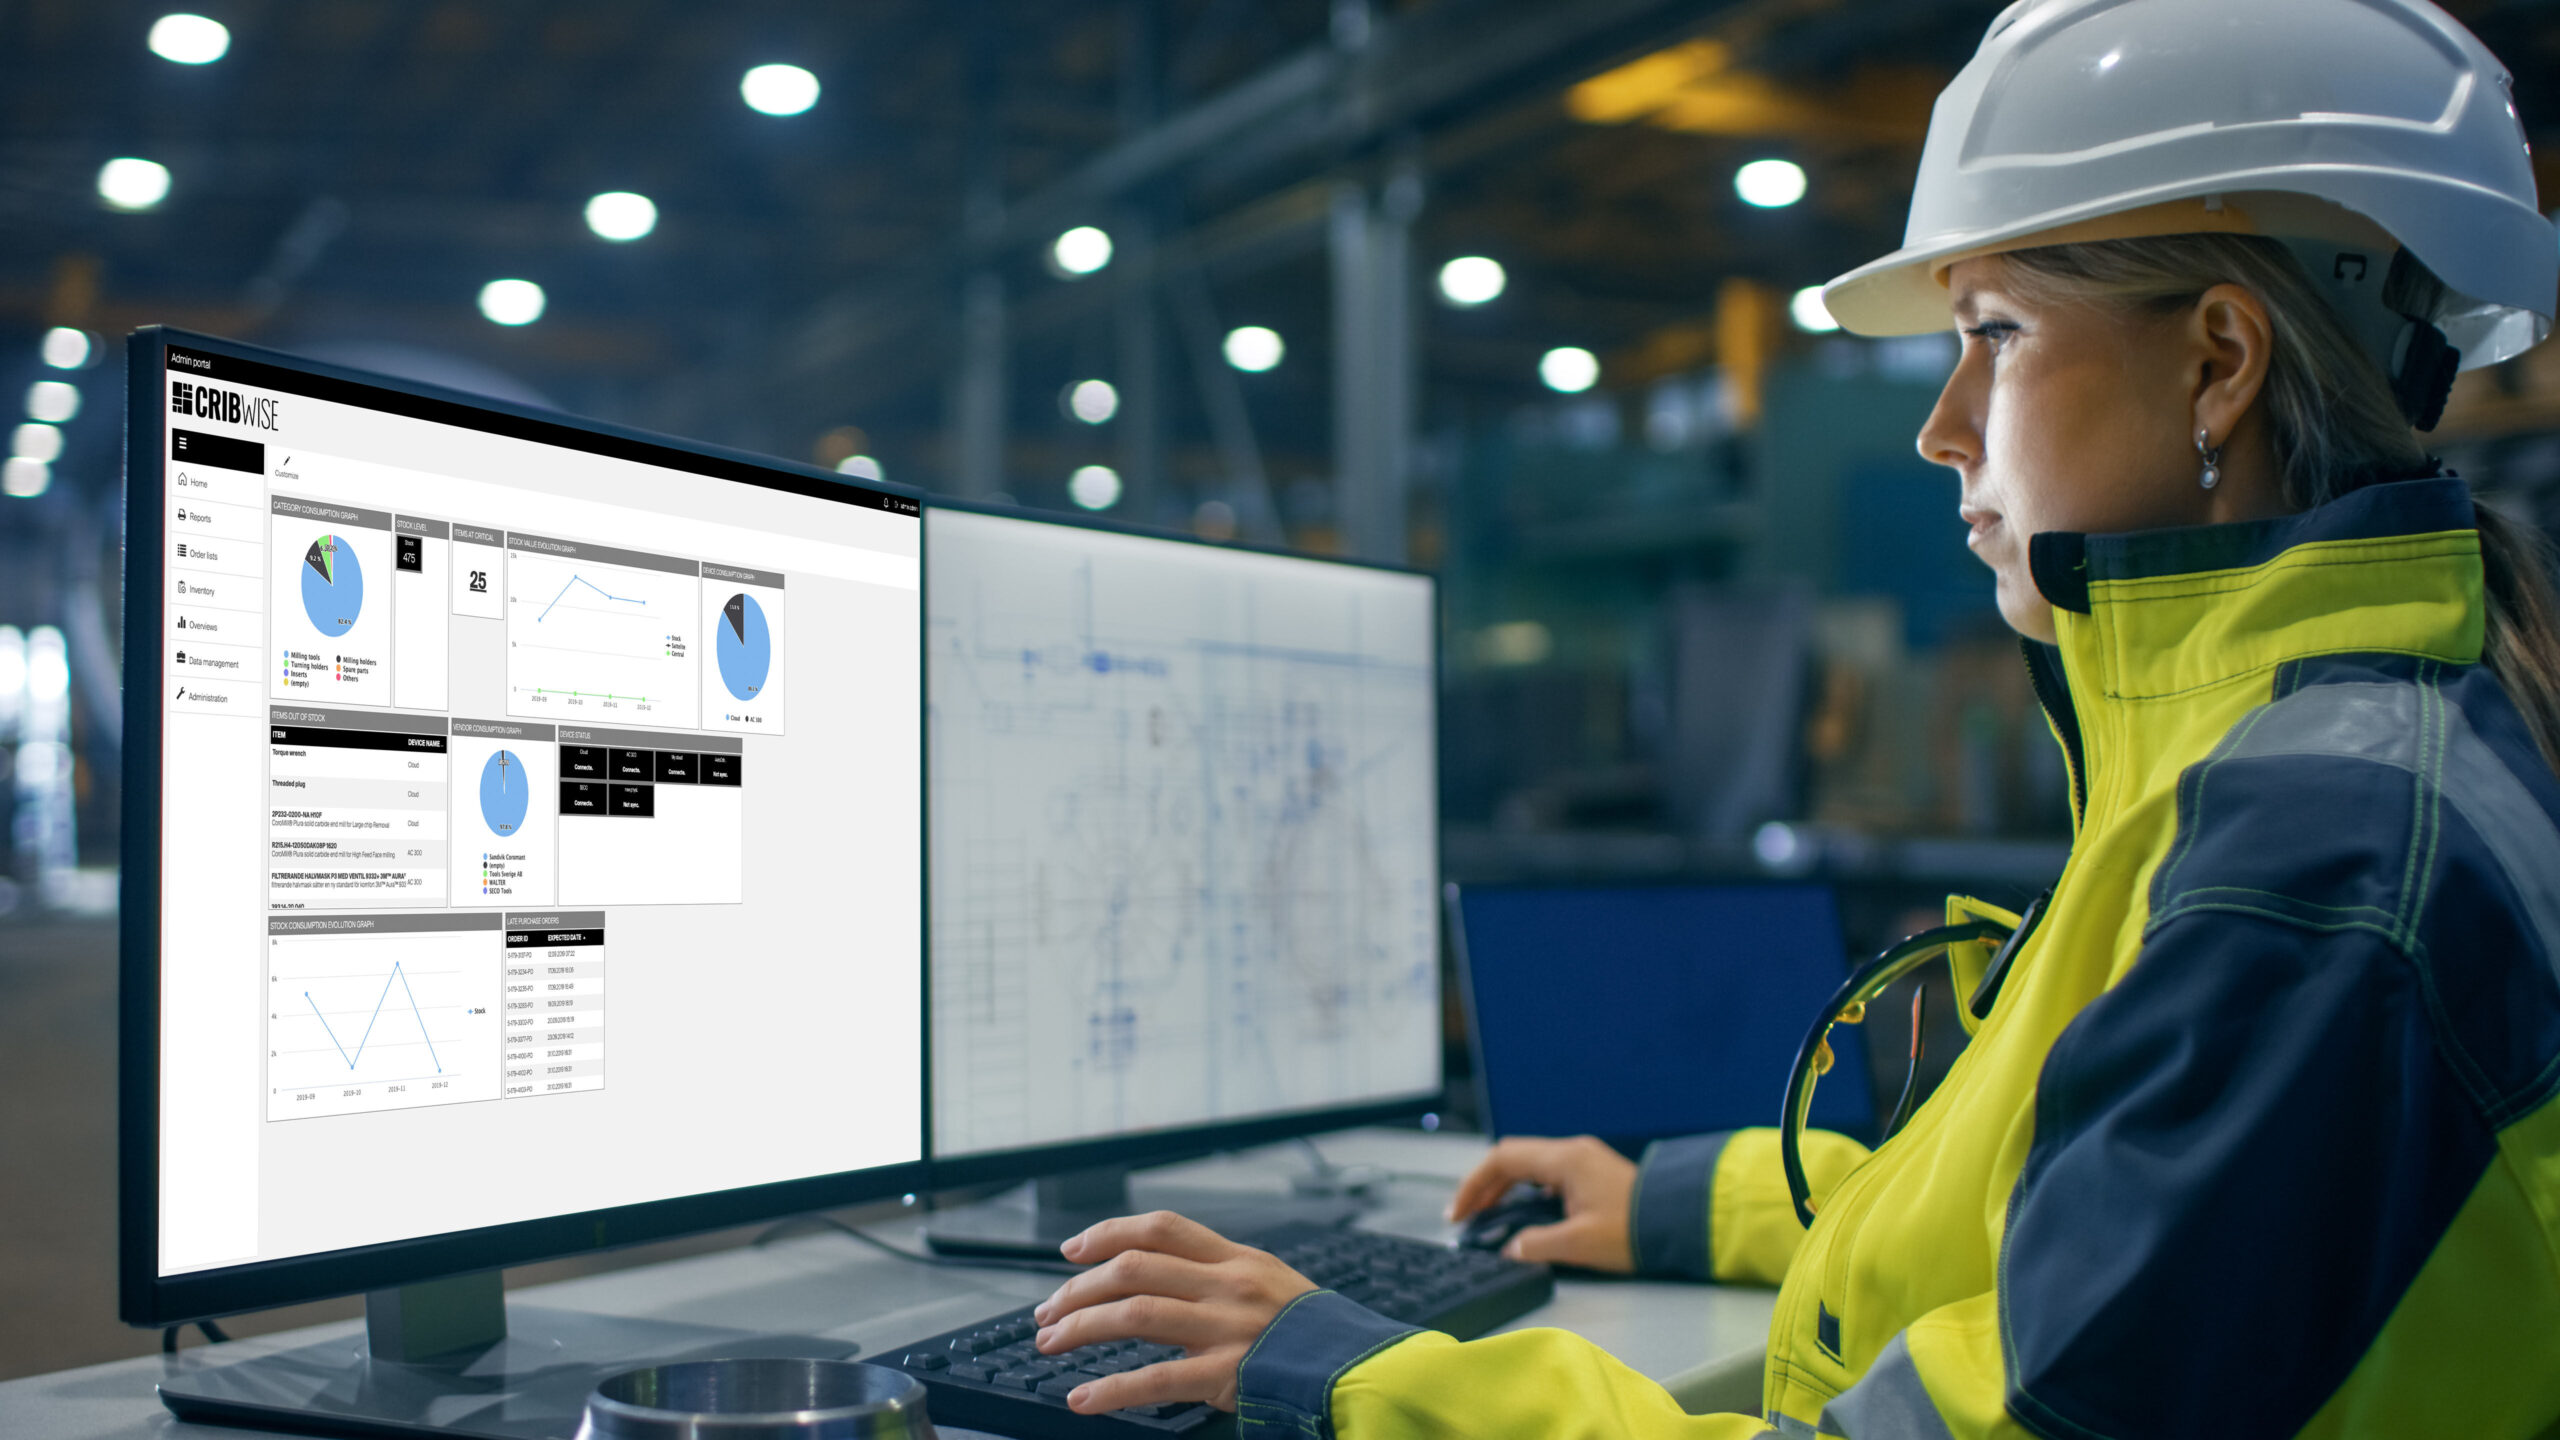 Sandvik launches CRIBWISE SaaS tooling inventory management technology 